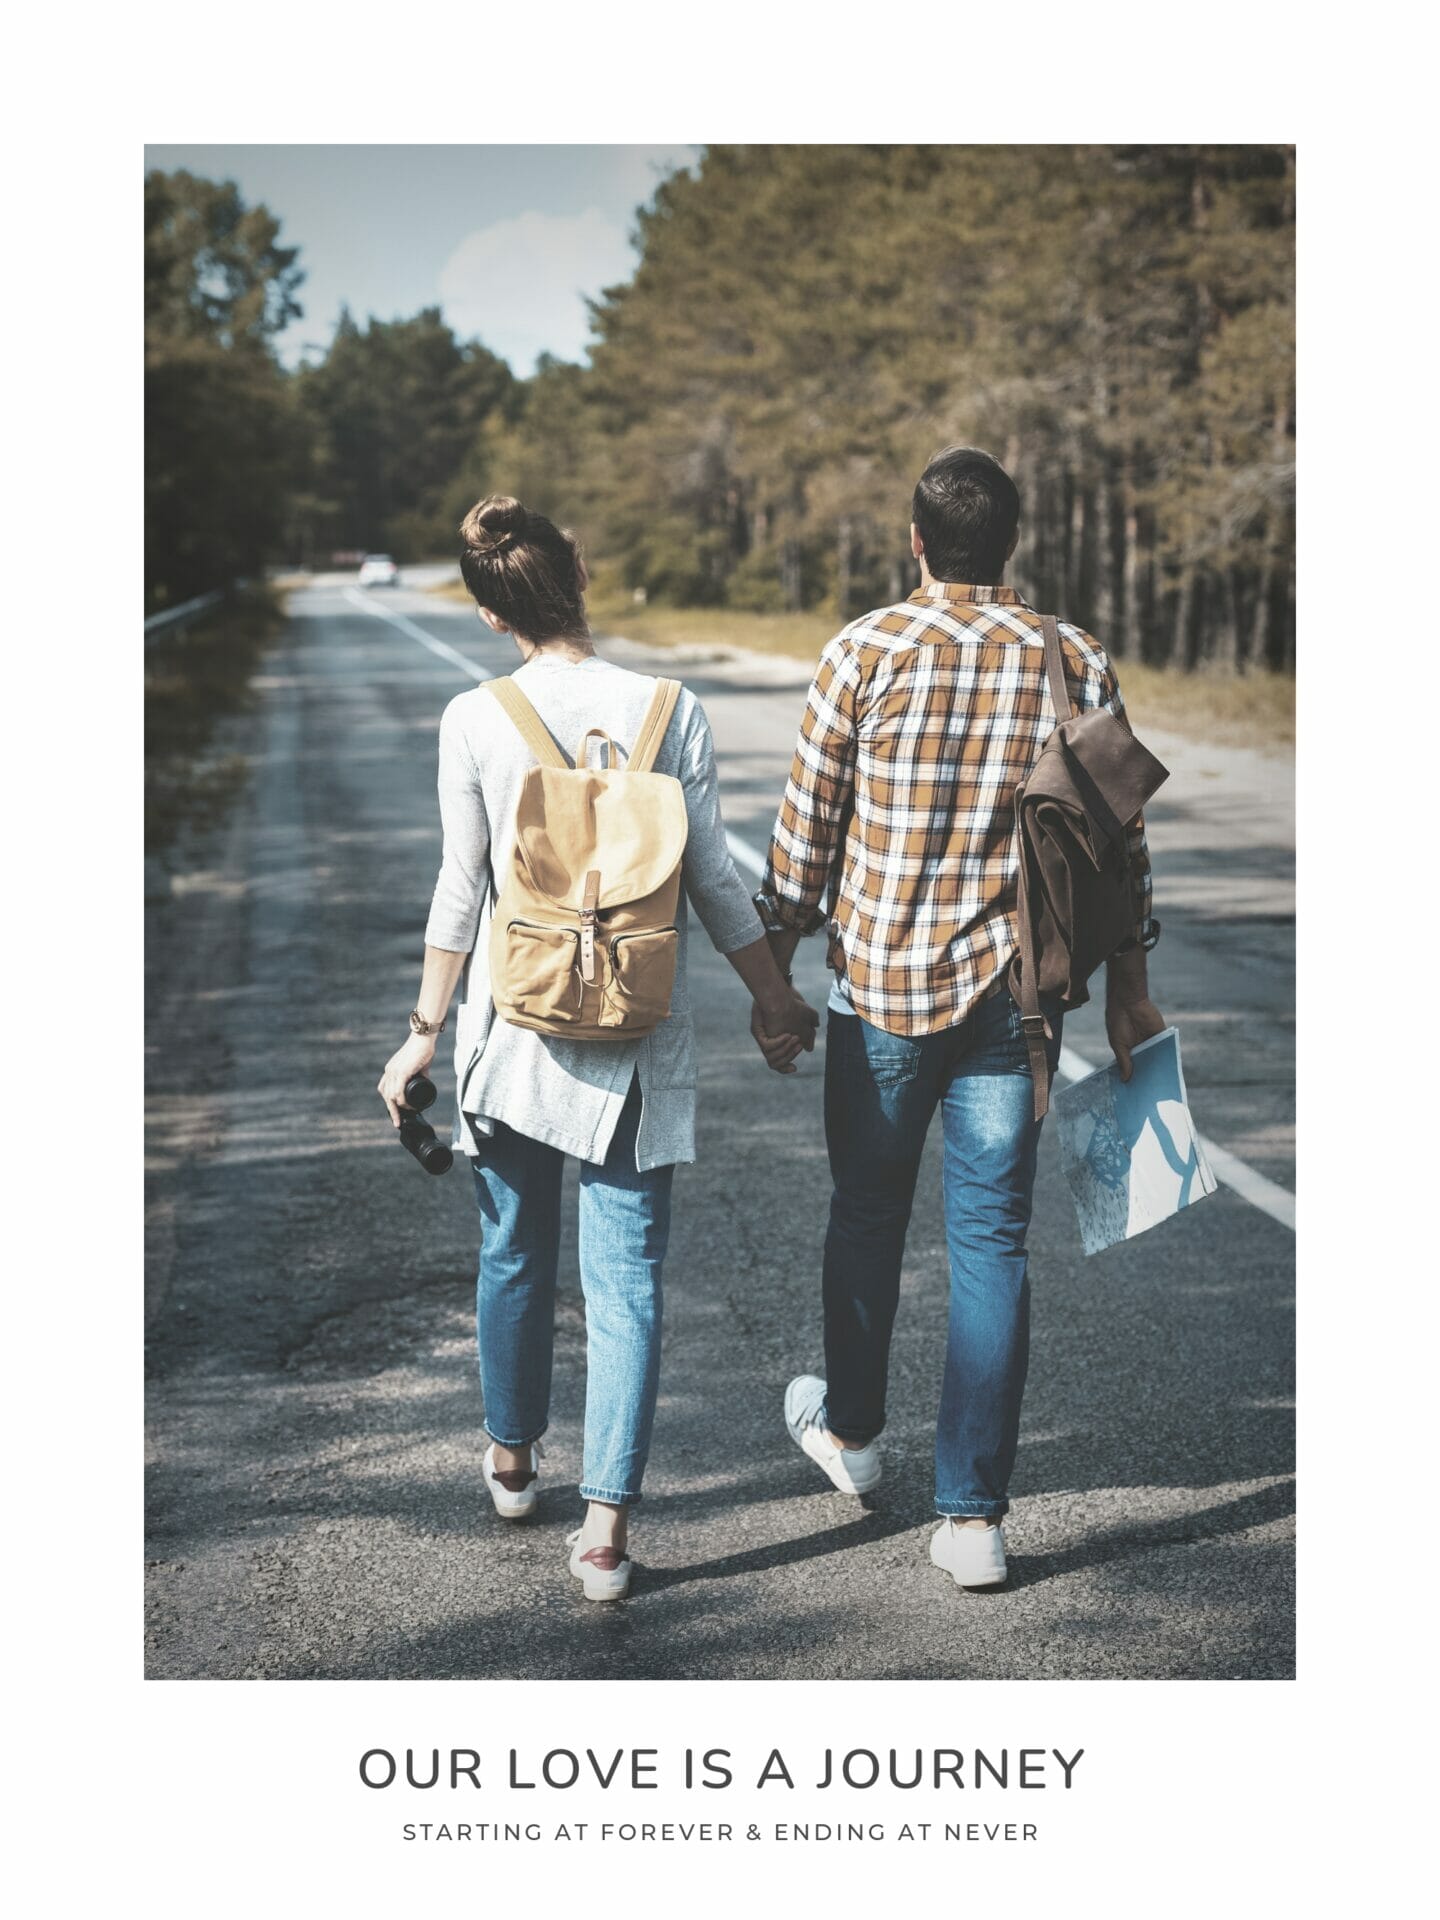 Poster of couple walking down a road together